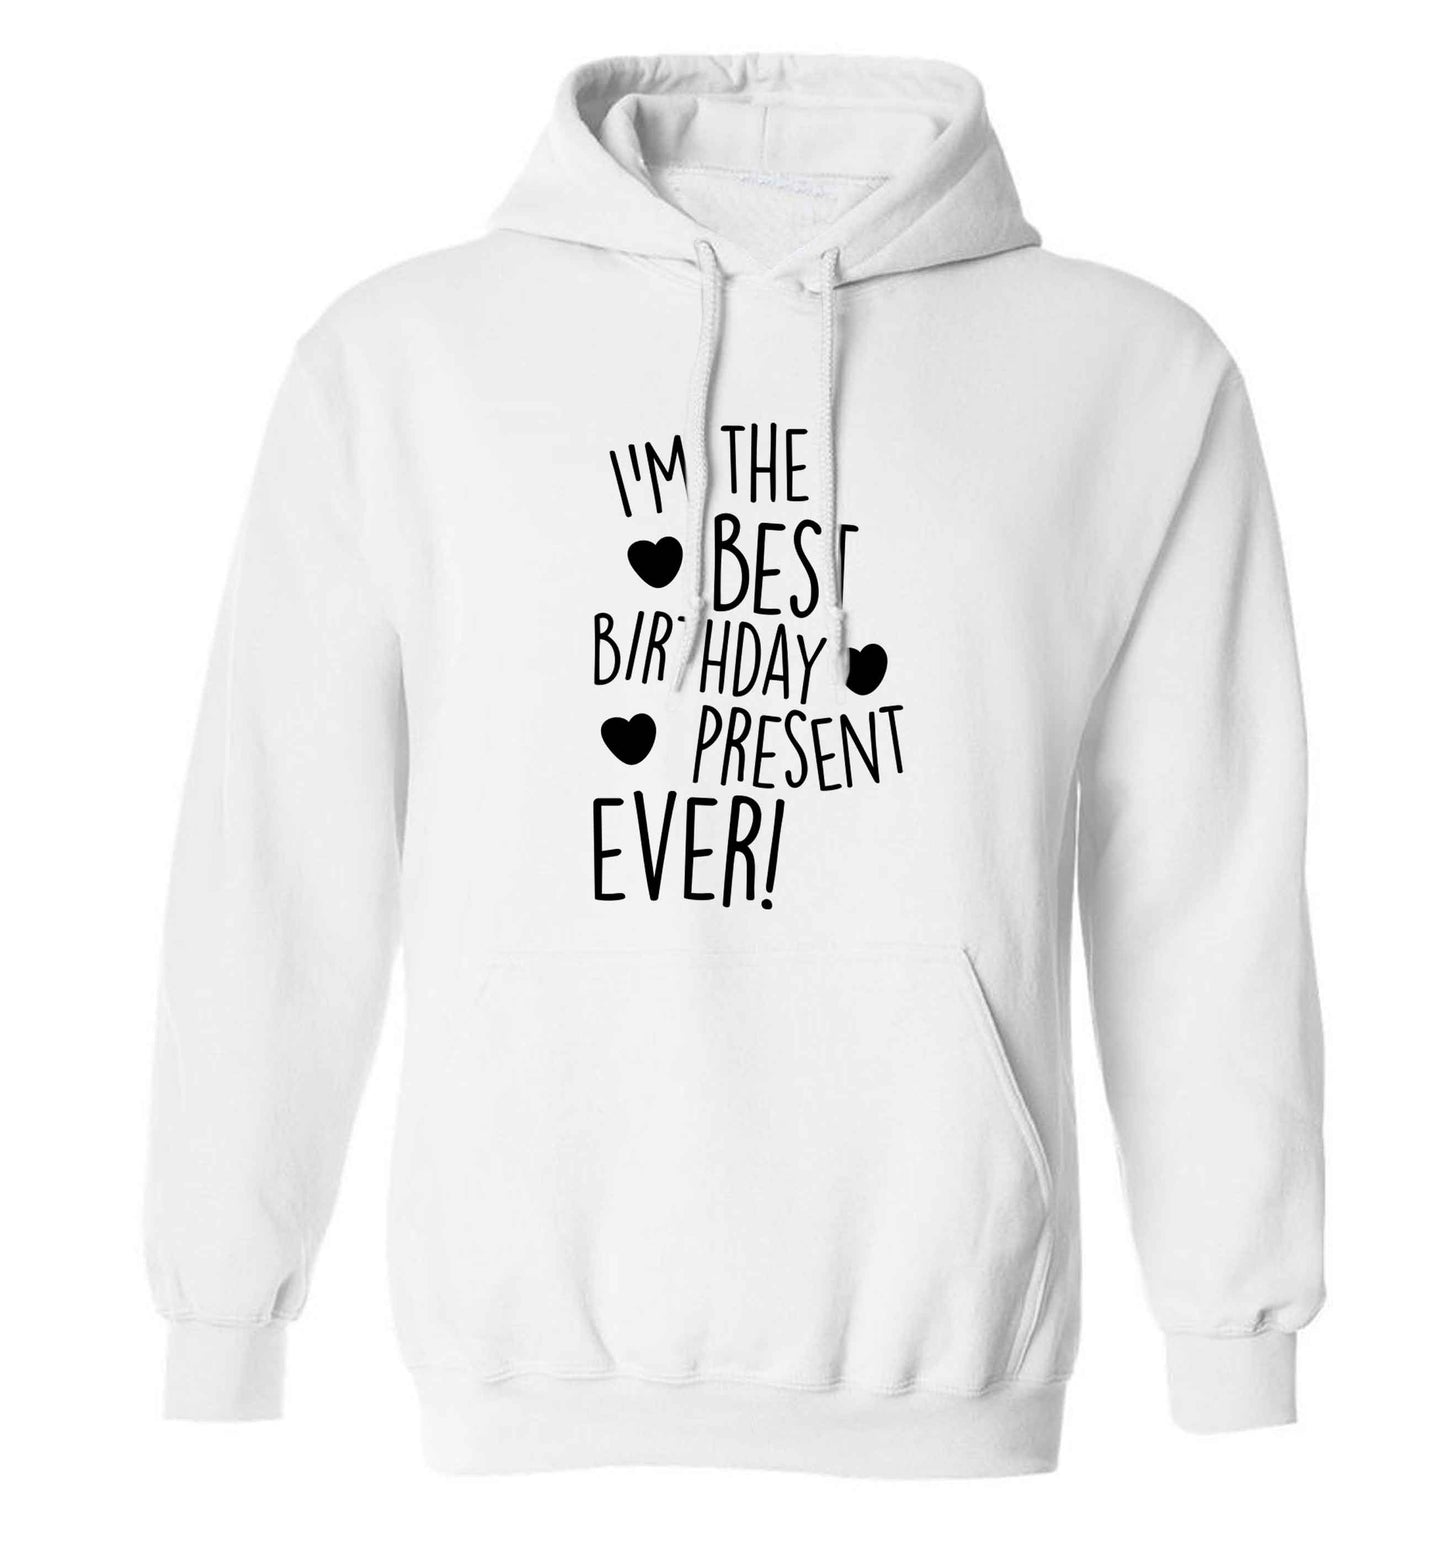 I'm the best birthday present ever adults unisex white hoodie 2XL